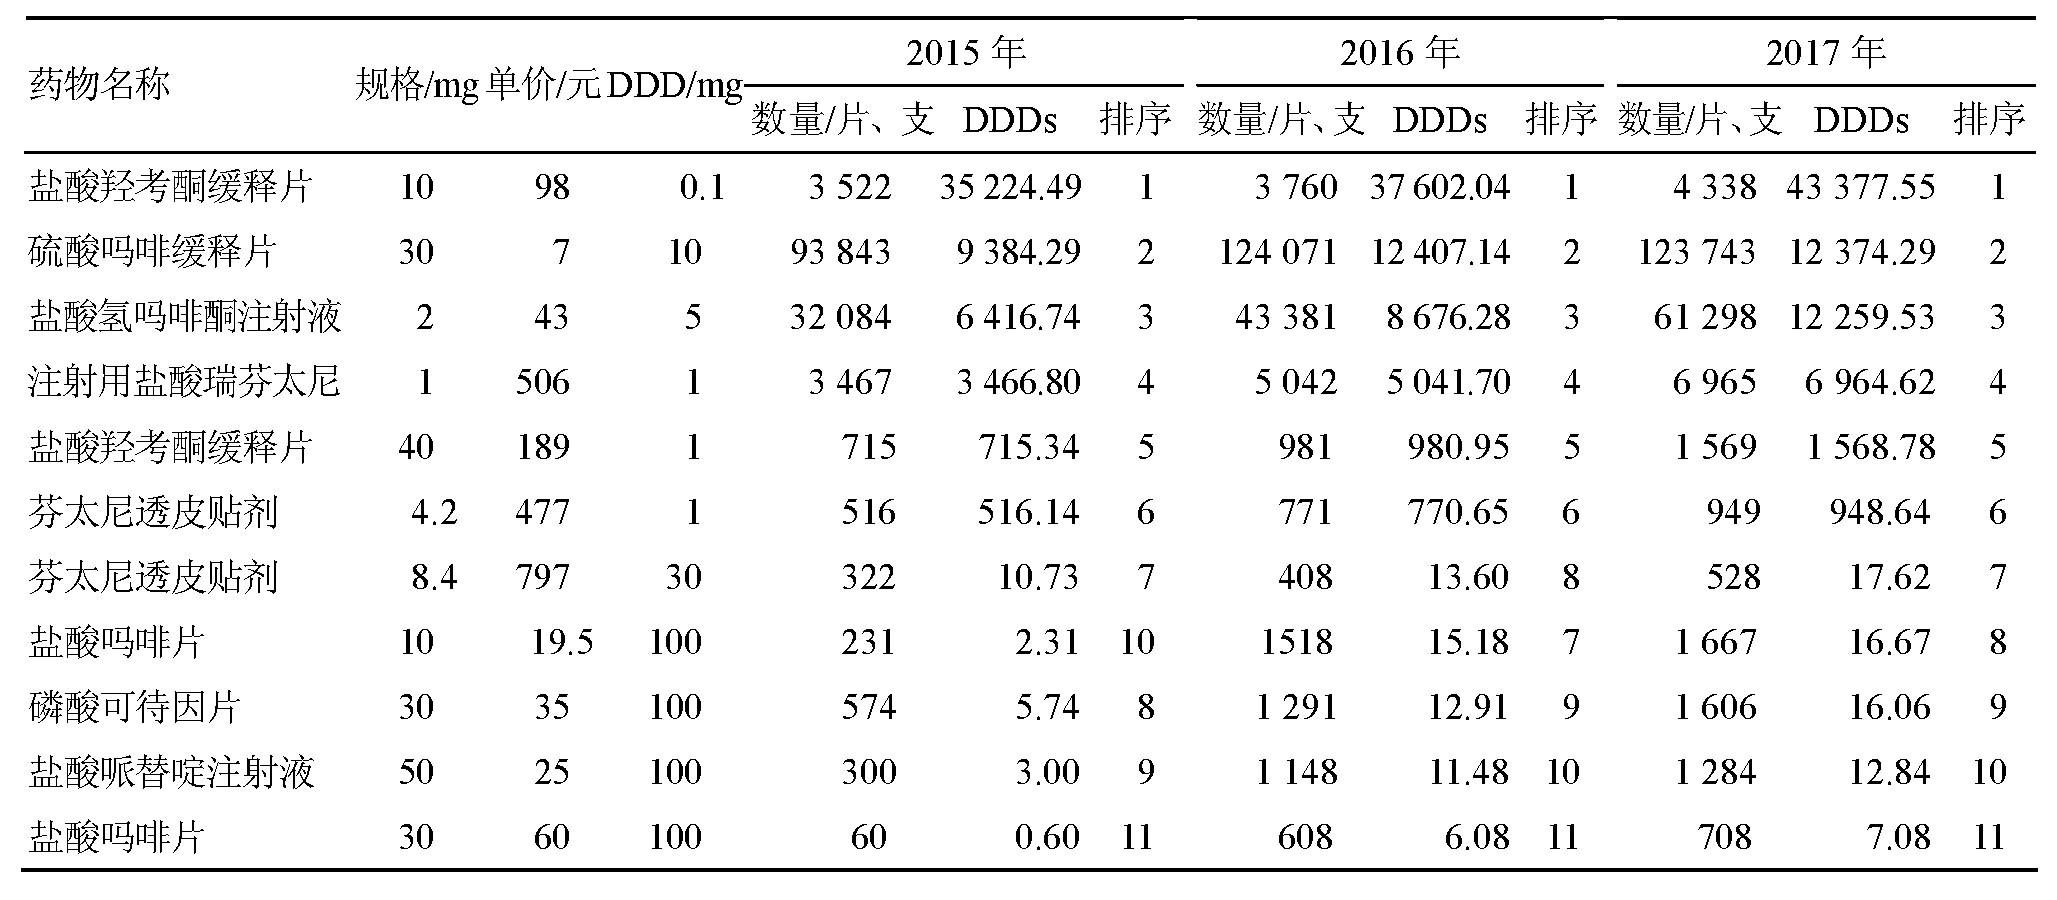 2 20152017ʹҩDDDsTable 2 DDDs and ranks of narcotic analgesic drugs from 2015 to 2017